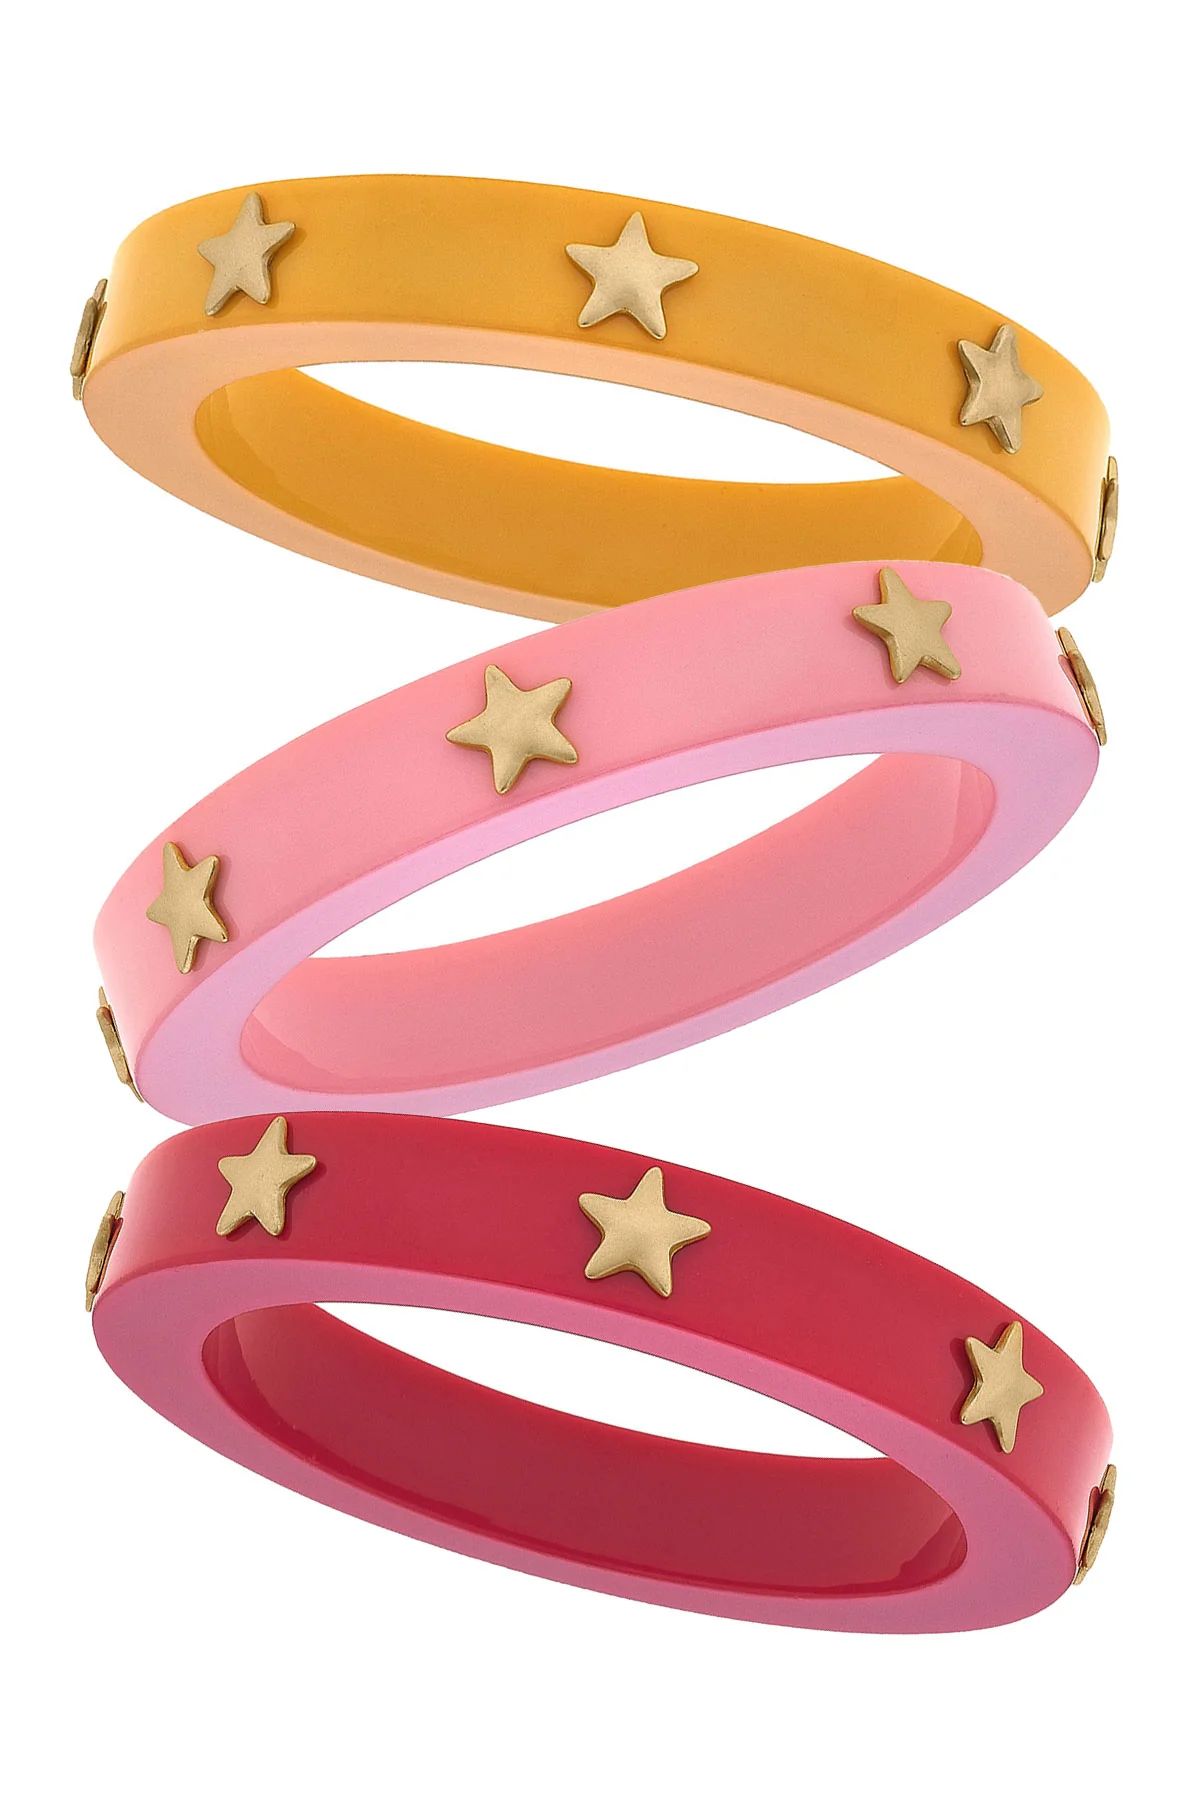 Darla Star Resin Bangle Stack - February Stack of the Month | CANVAS